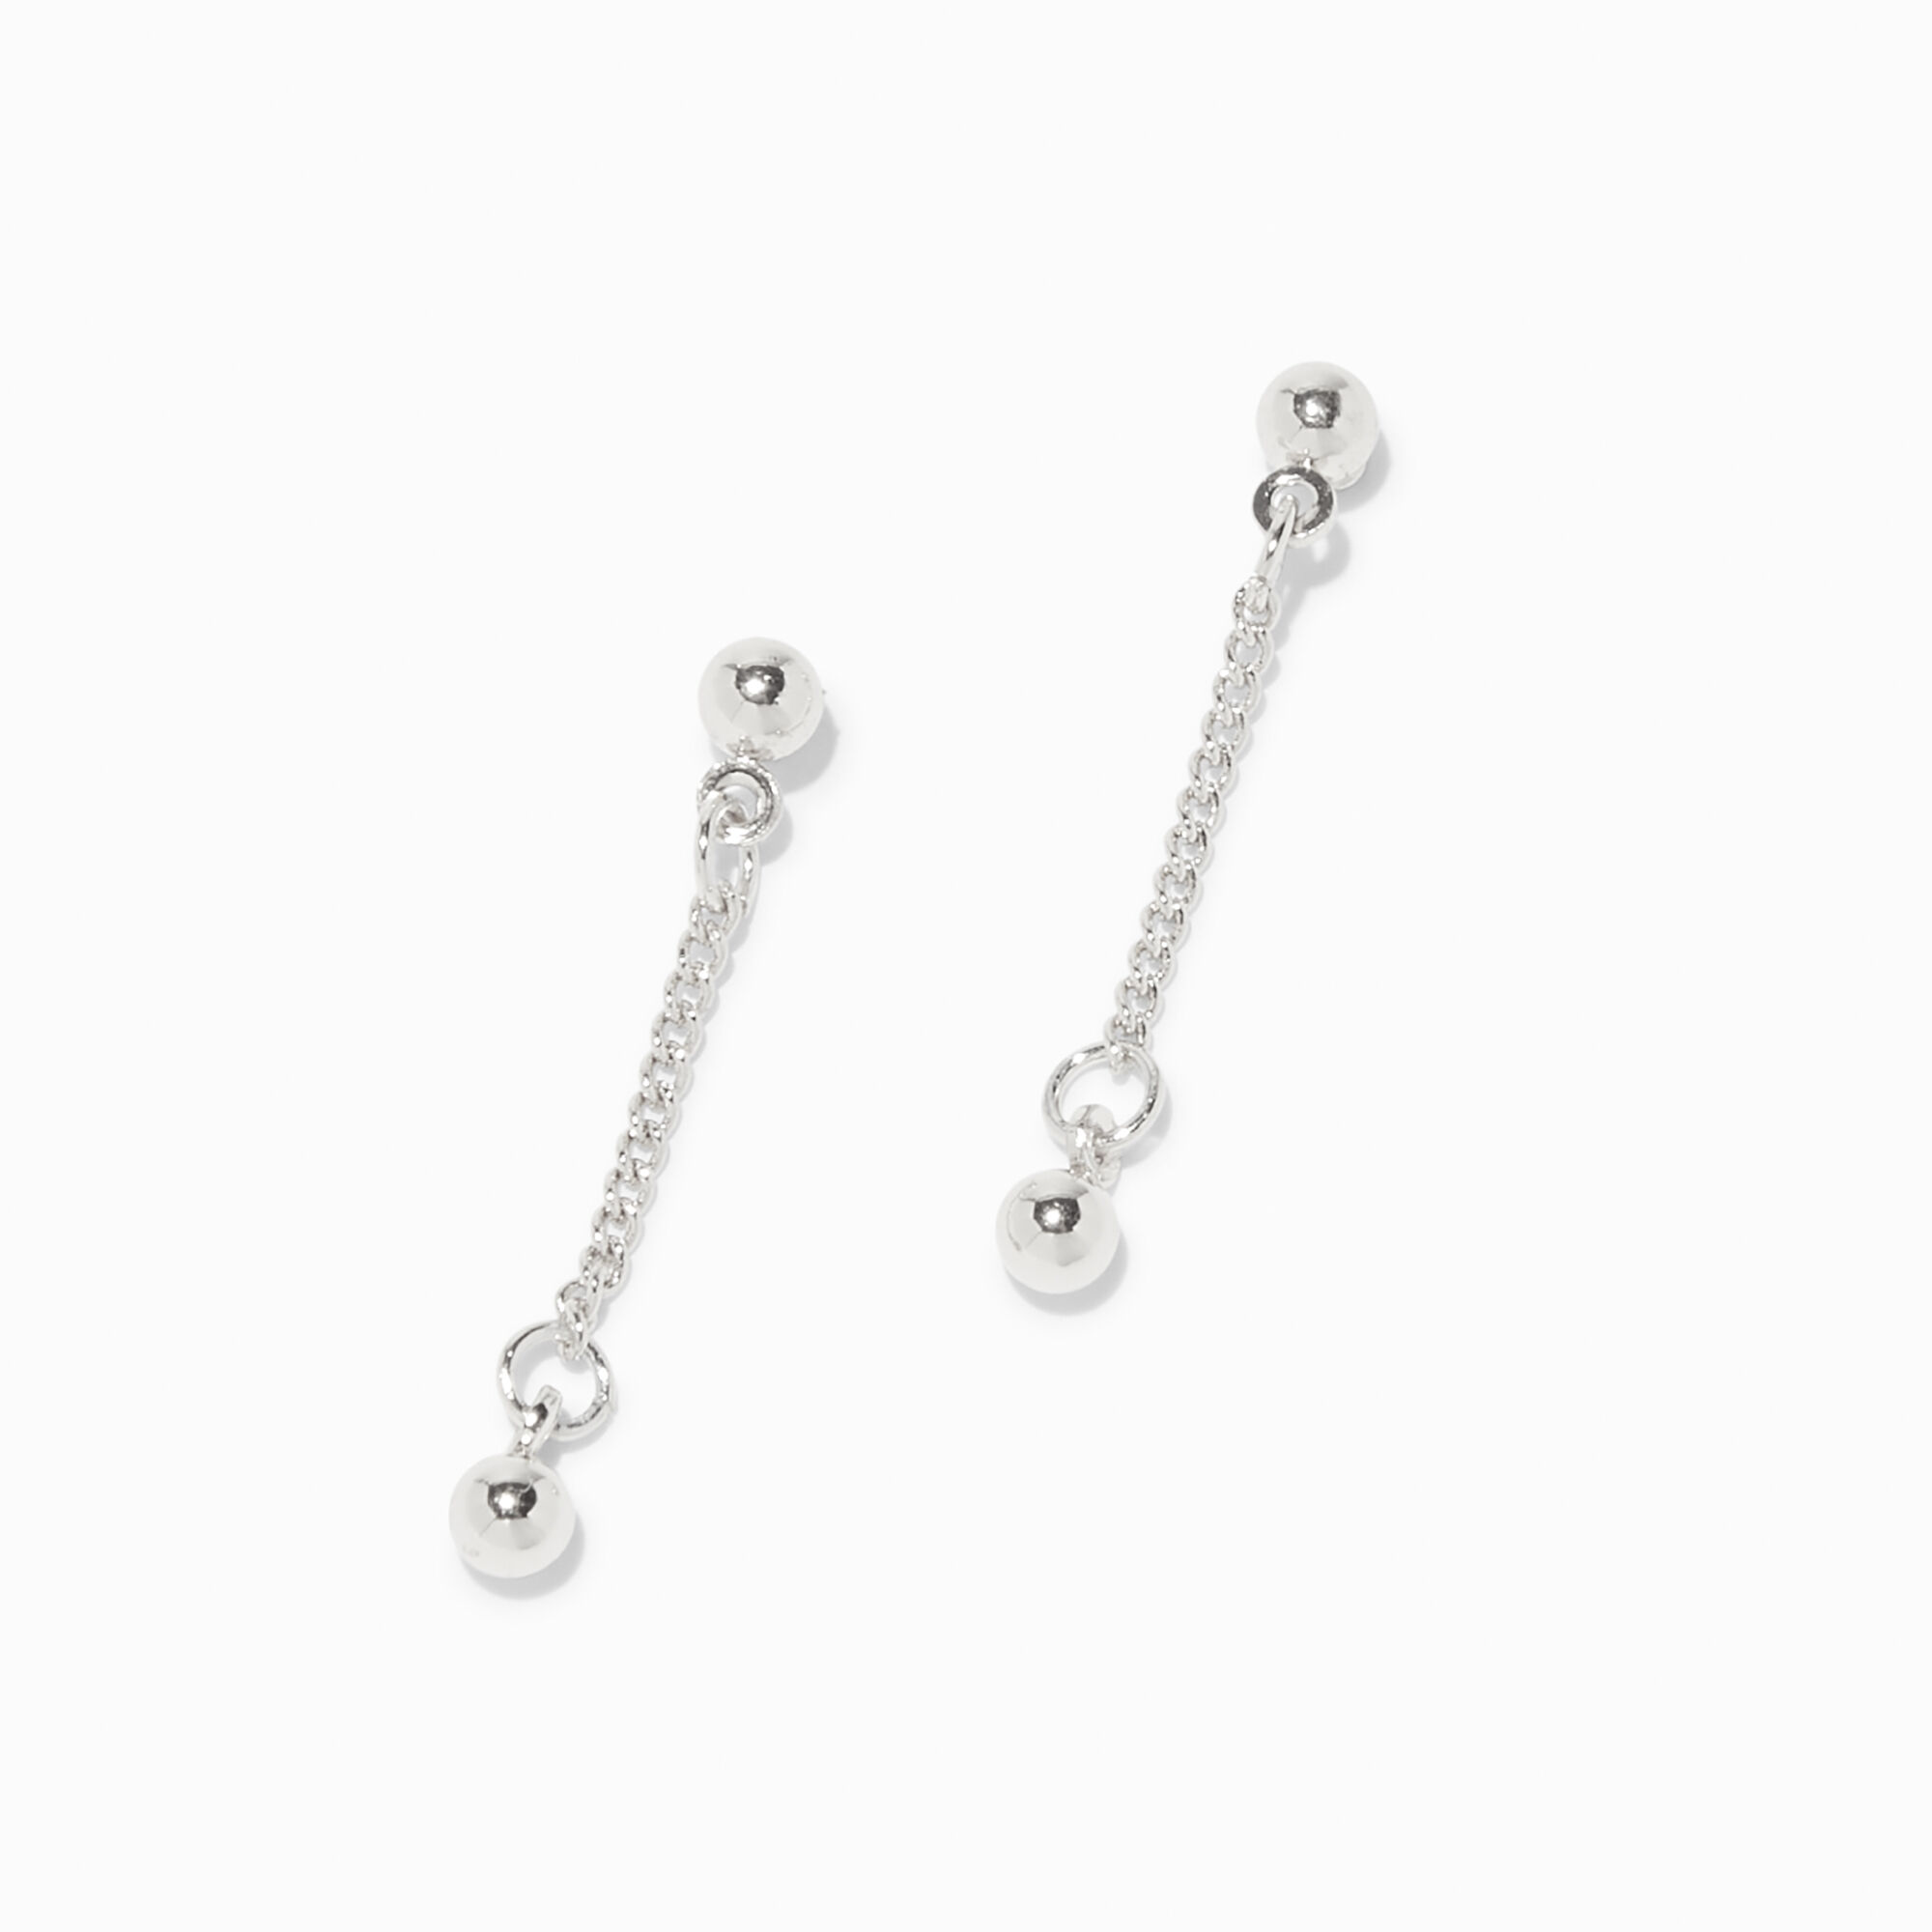 View Claires Tone Ball 1 Drop Earrings Silver information